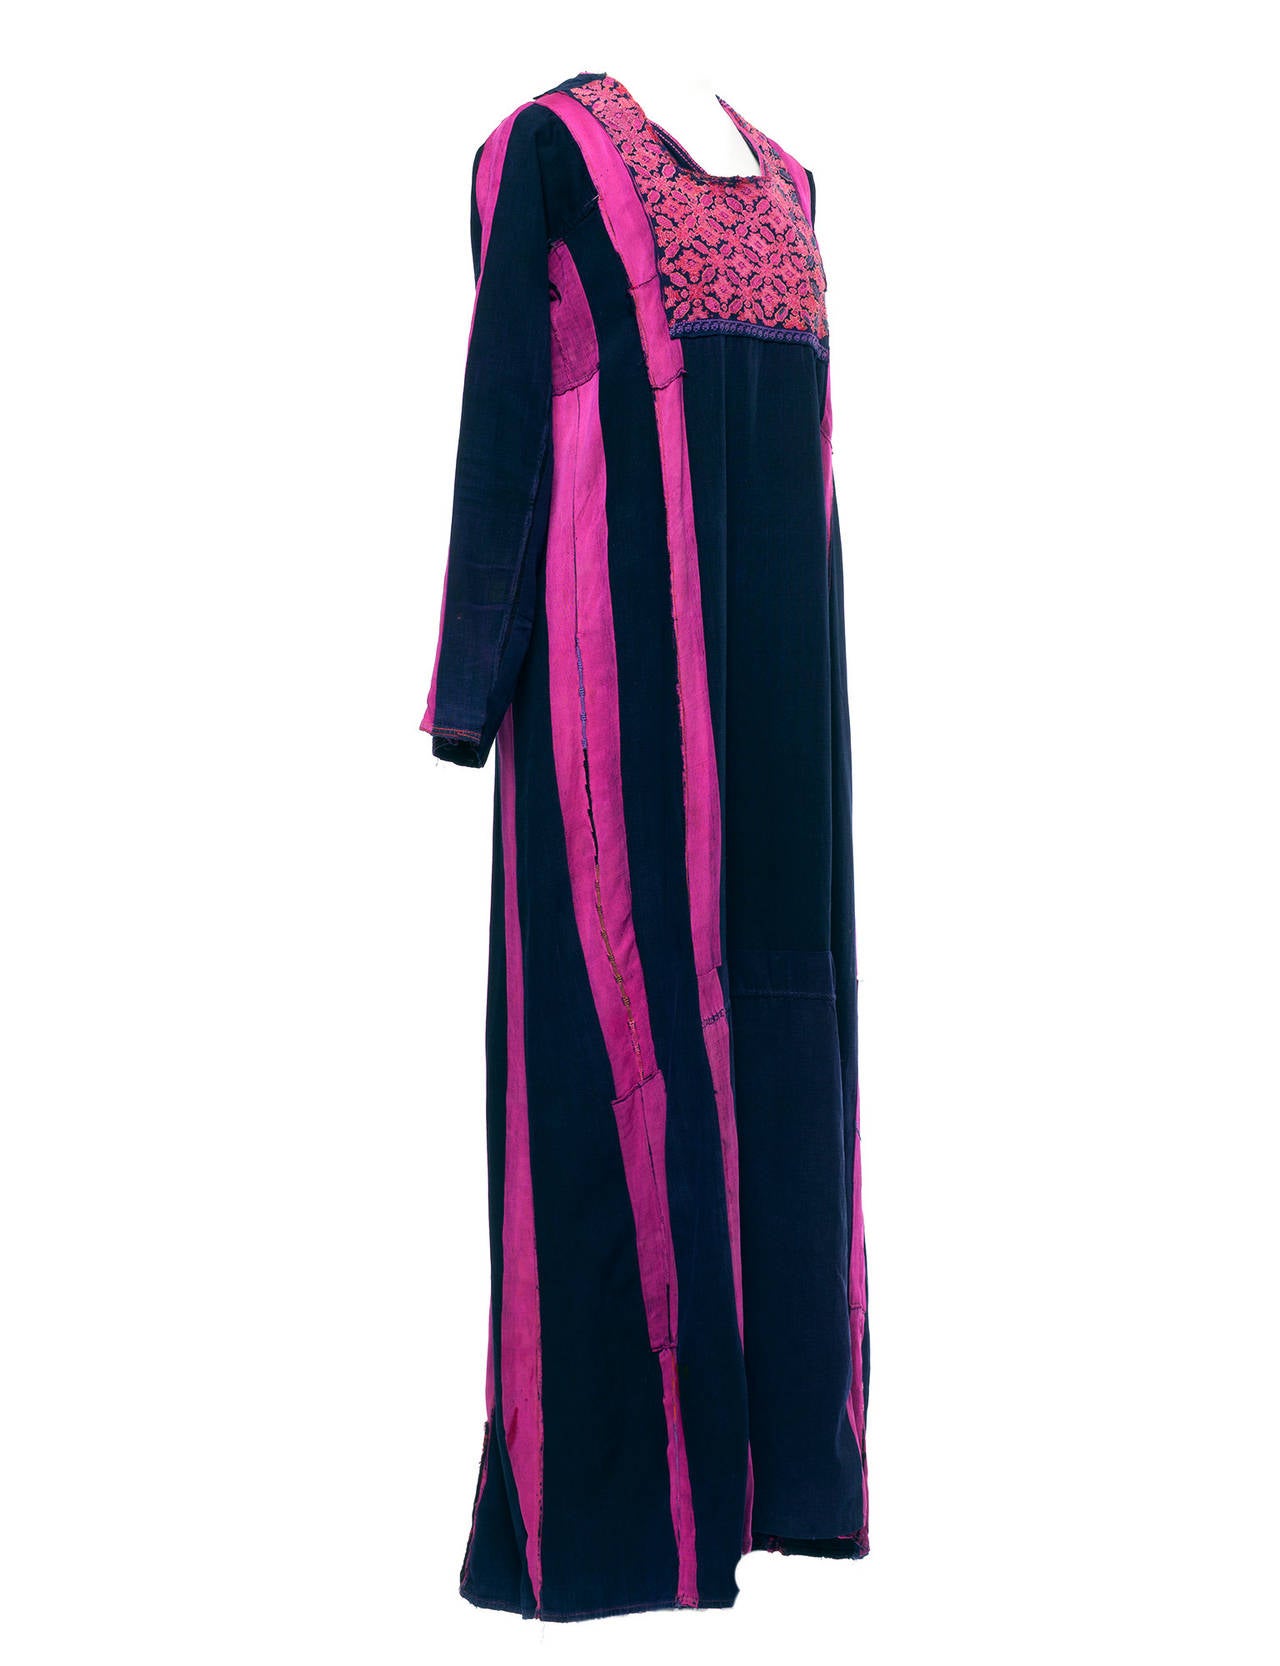 Caftan has multiple stripe indigo woven details, dyed with natural hennas, embroiderd front bid and bottom back in a traditional floral print. Not sure of year or where it comes from exactly but this piece is a beauty.